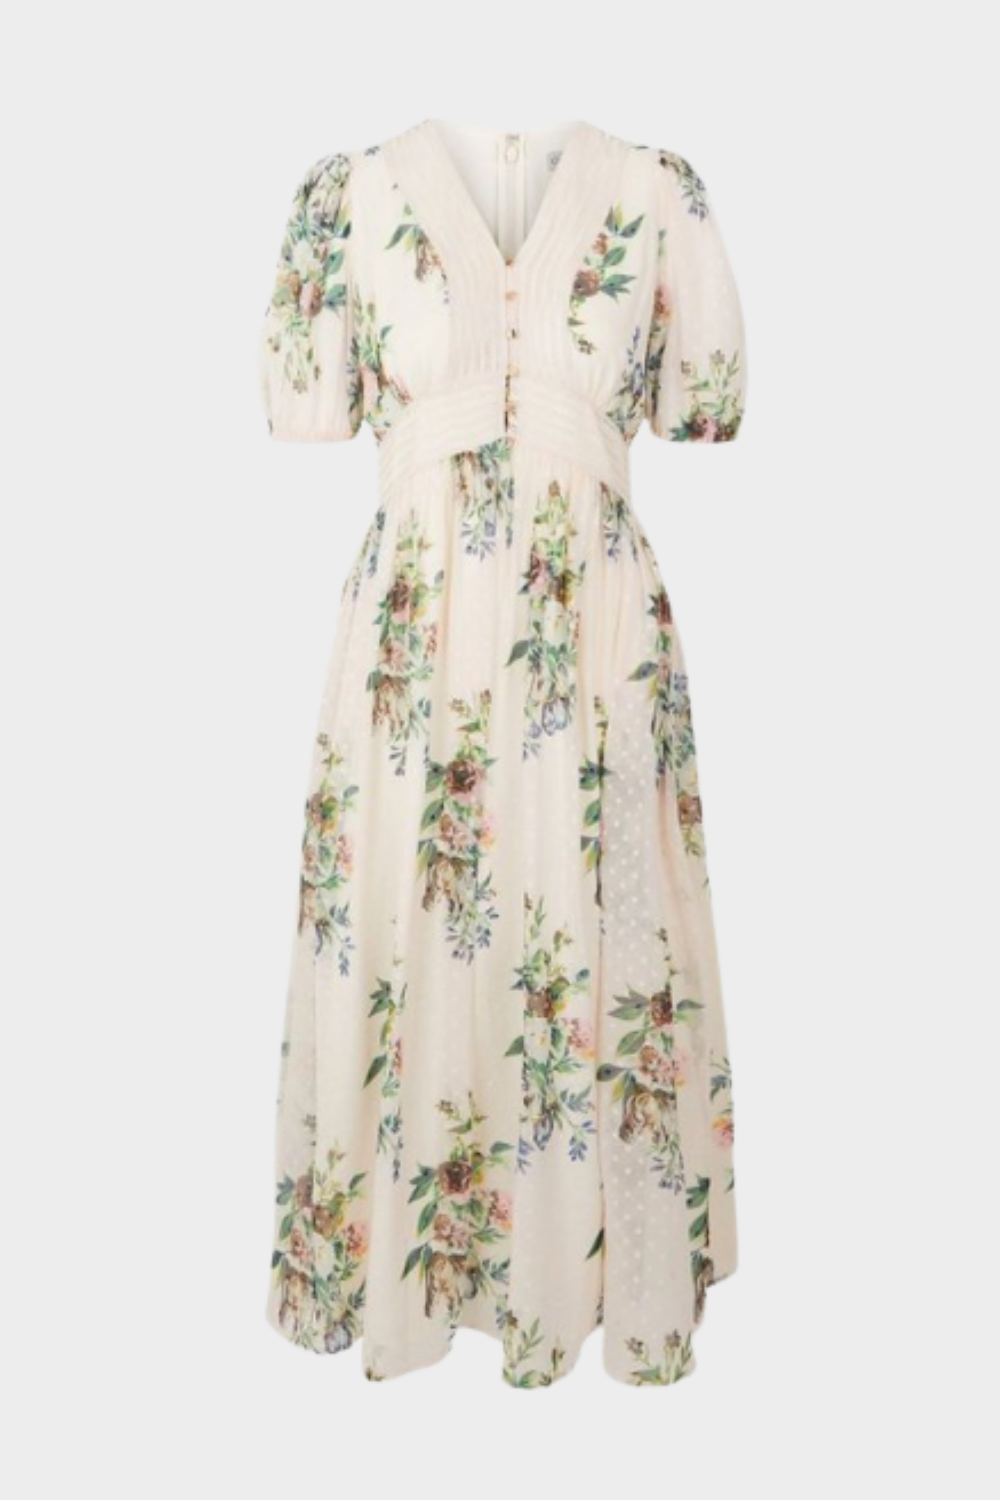 THE MOST BEAUTIFUL, AFFORDABLE LONG DRESSES FOR SPRING SUMMER 2021 ...